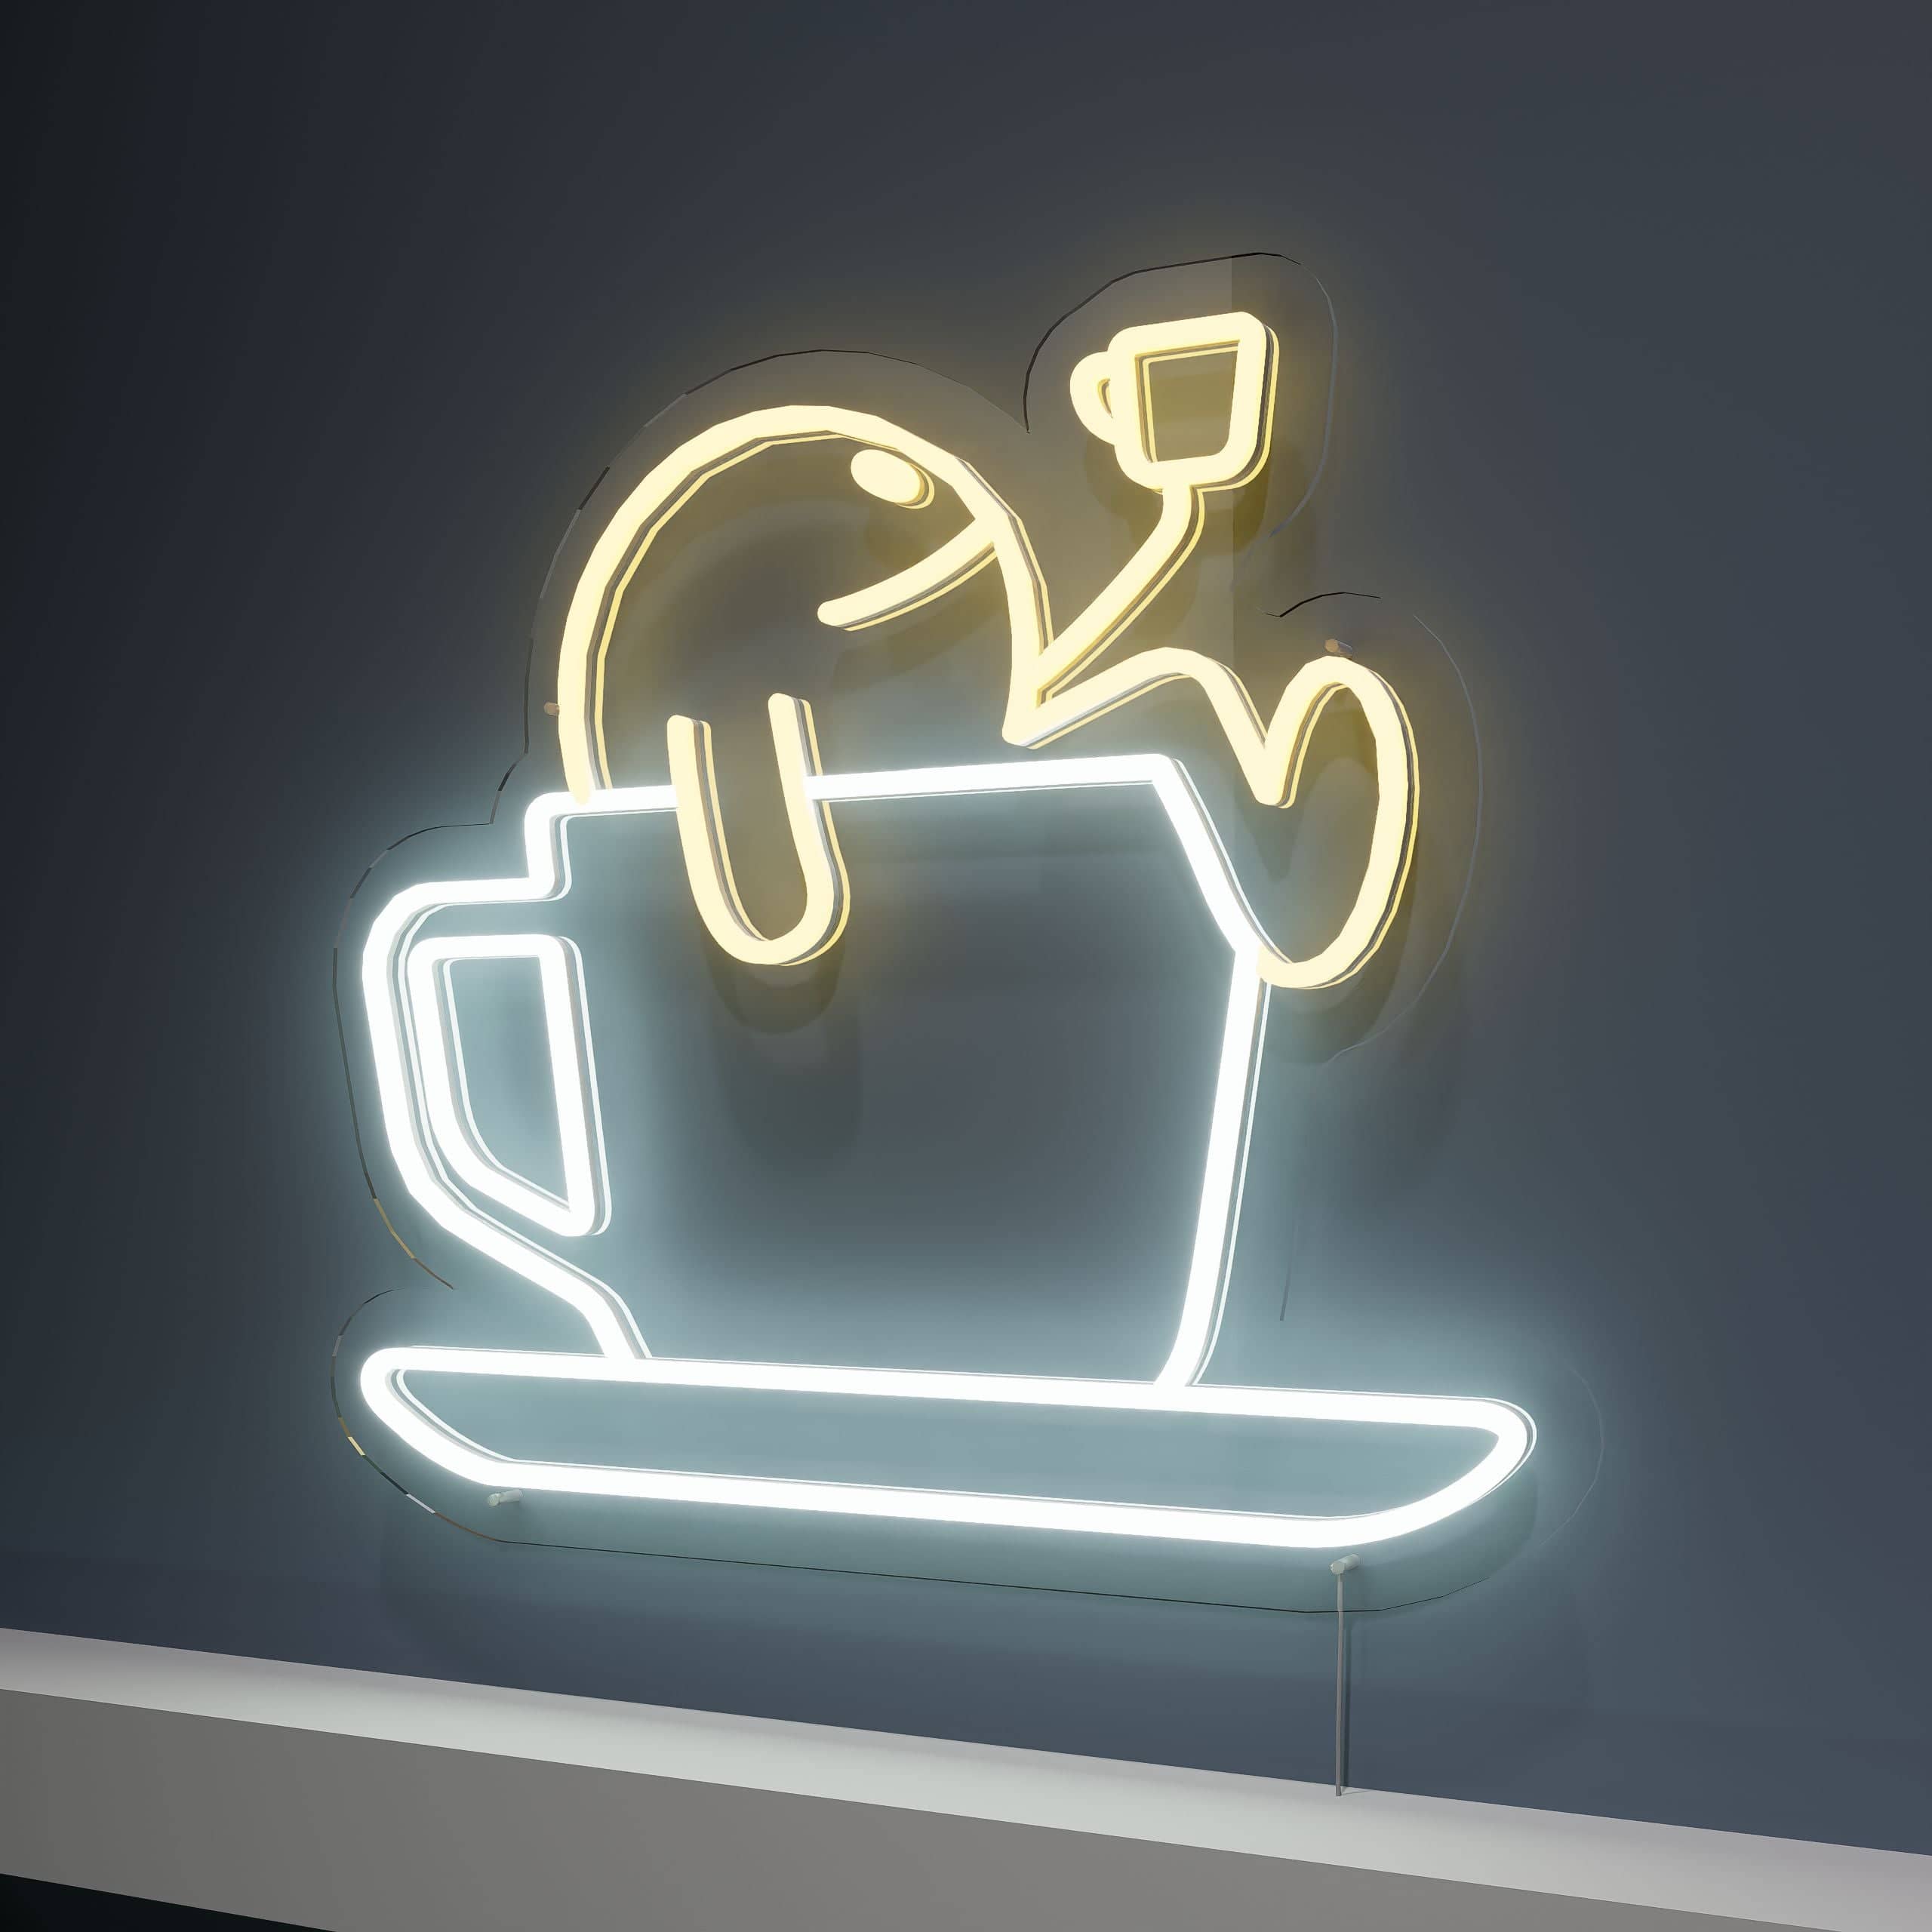 Brighten your kitchen with a coffee neon light